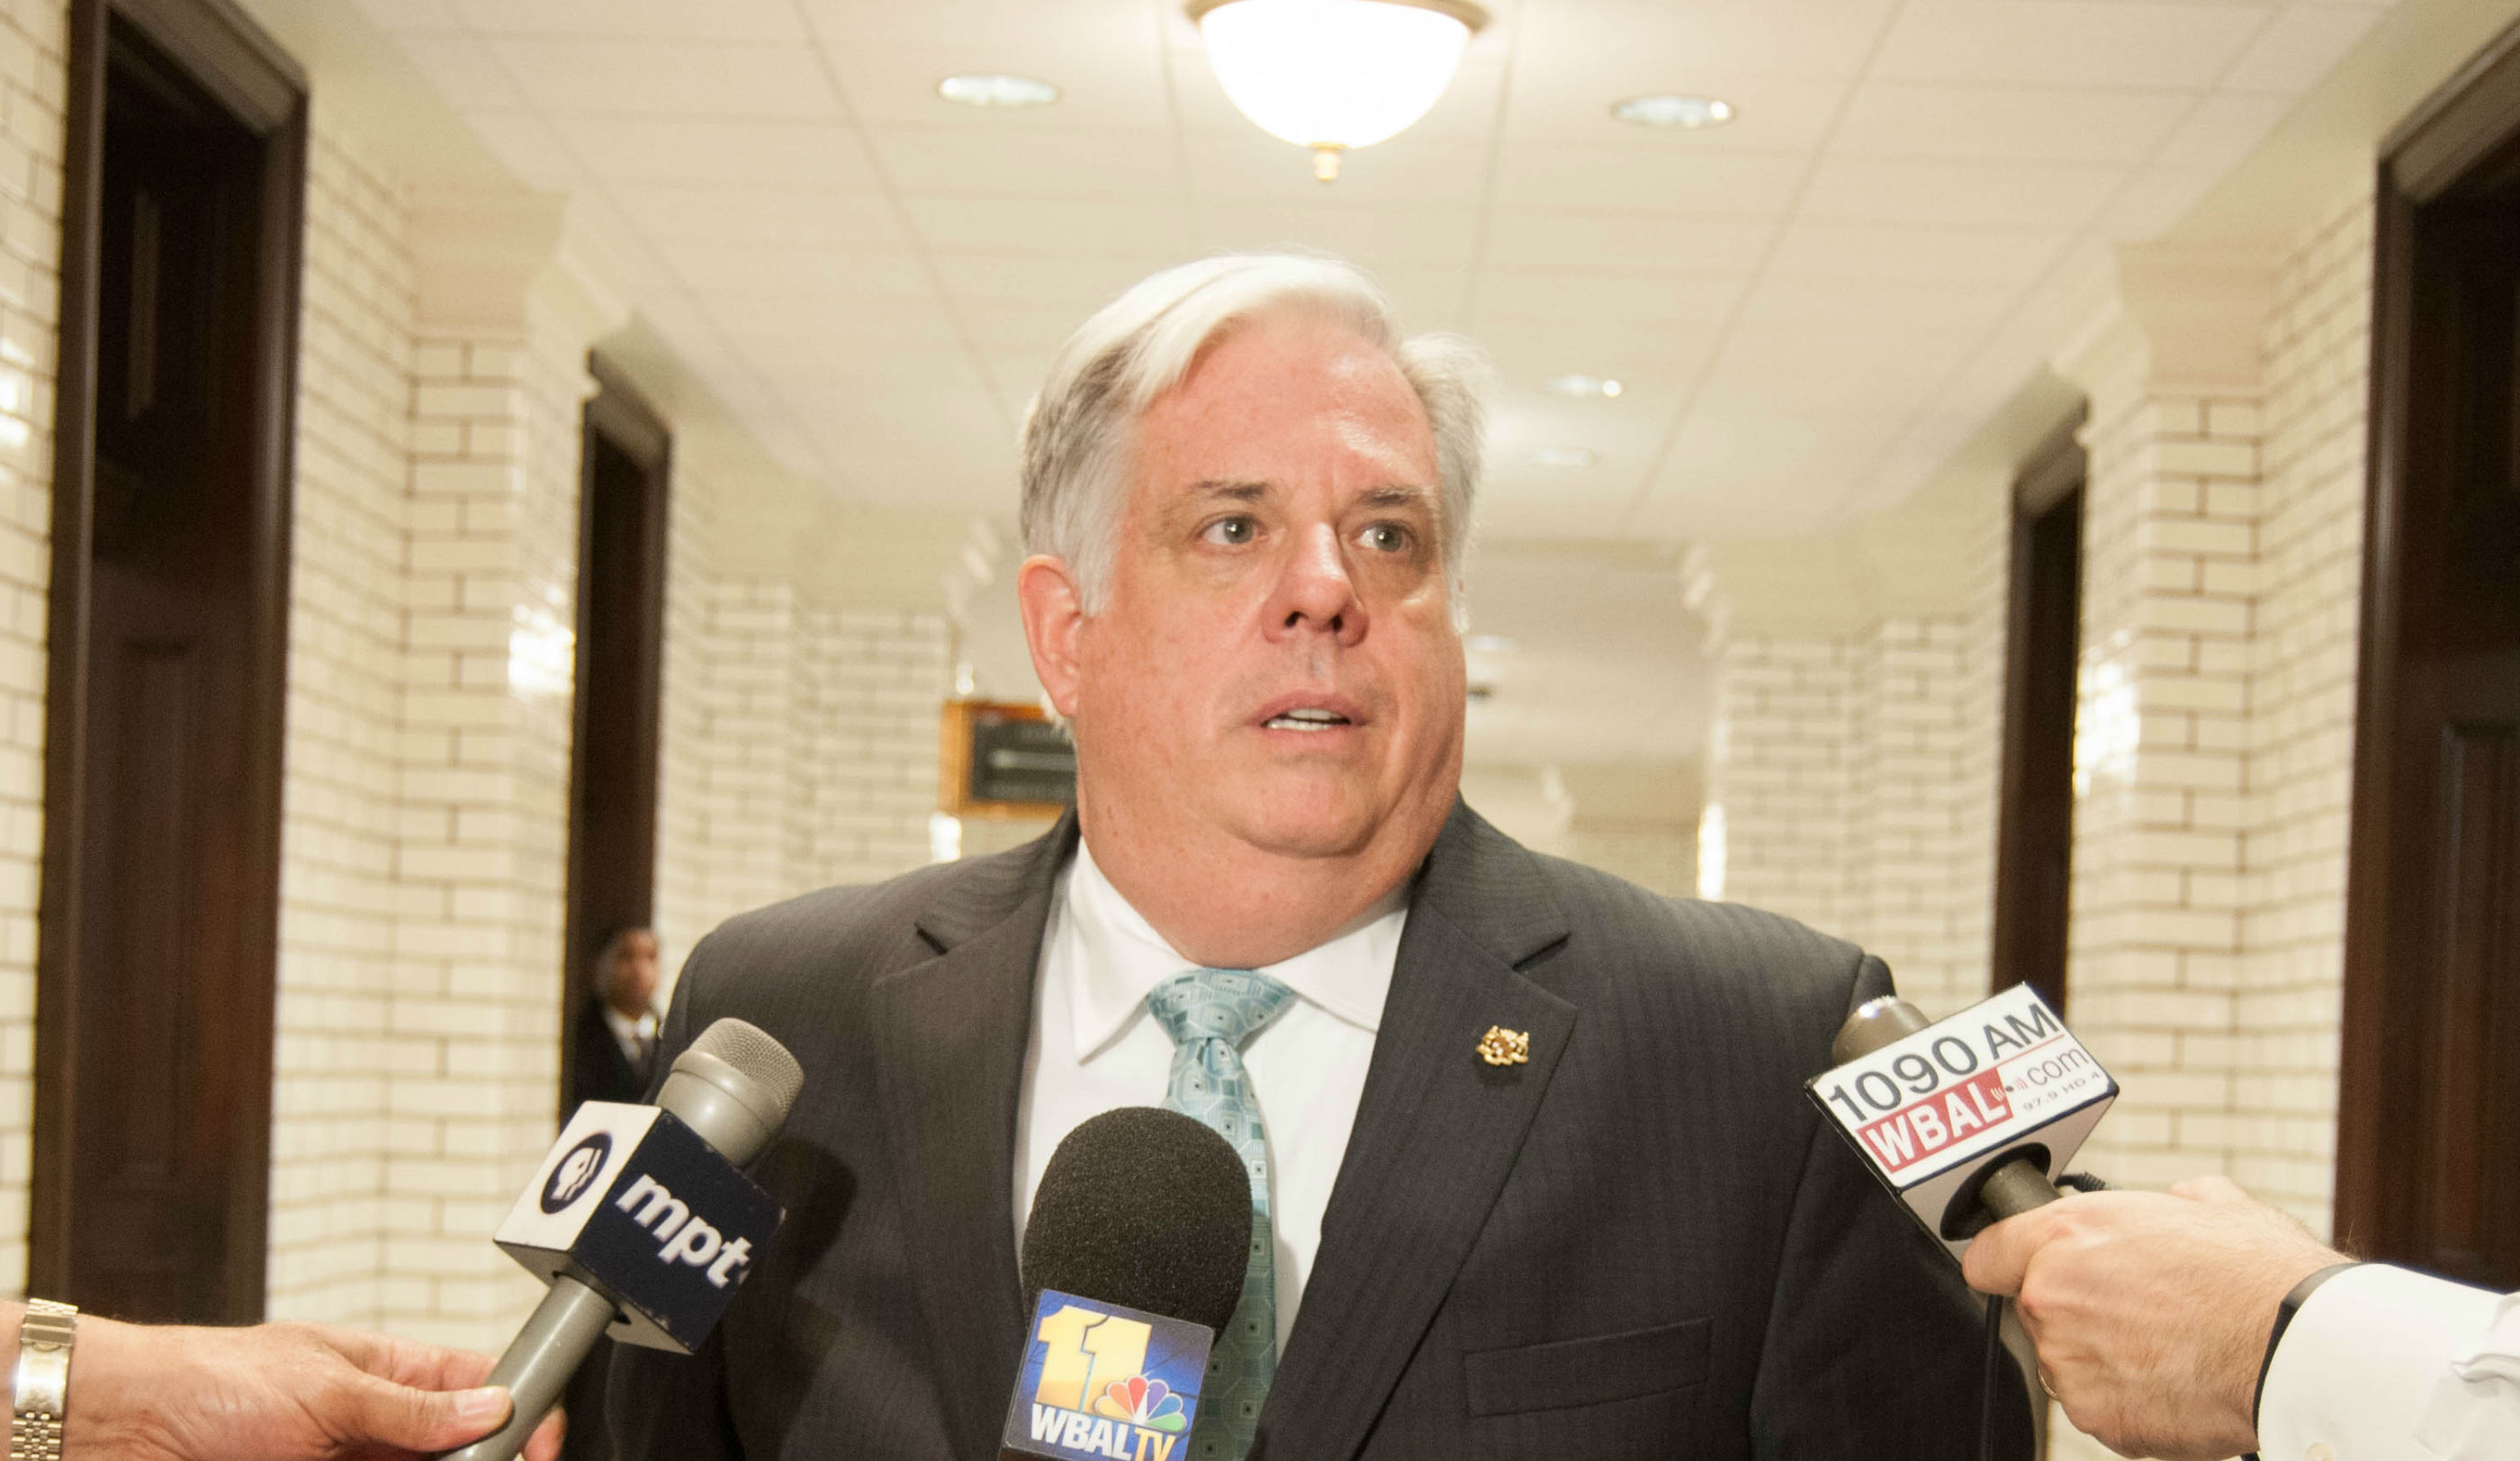 At the end, Hogan and lawmakers fighting at the margins